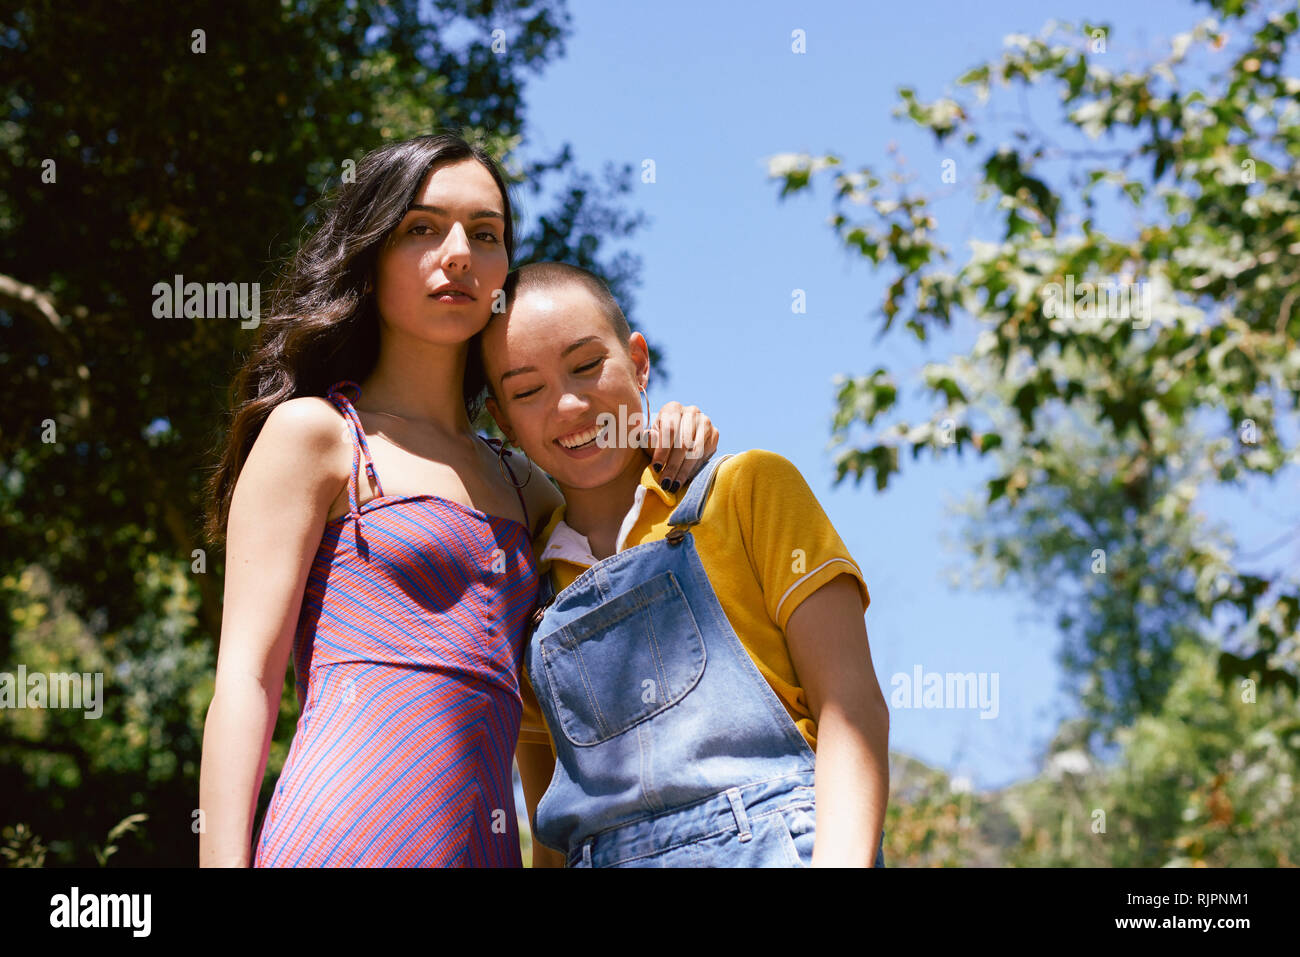 Two young female friends in park, portrait, Los Angeles, California, USA Stock Photo